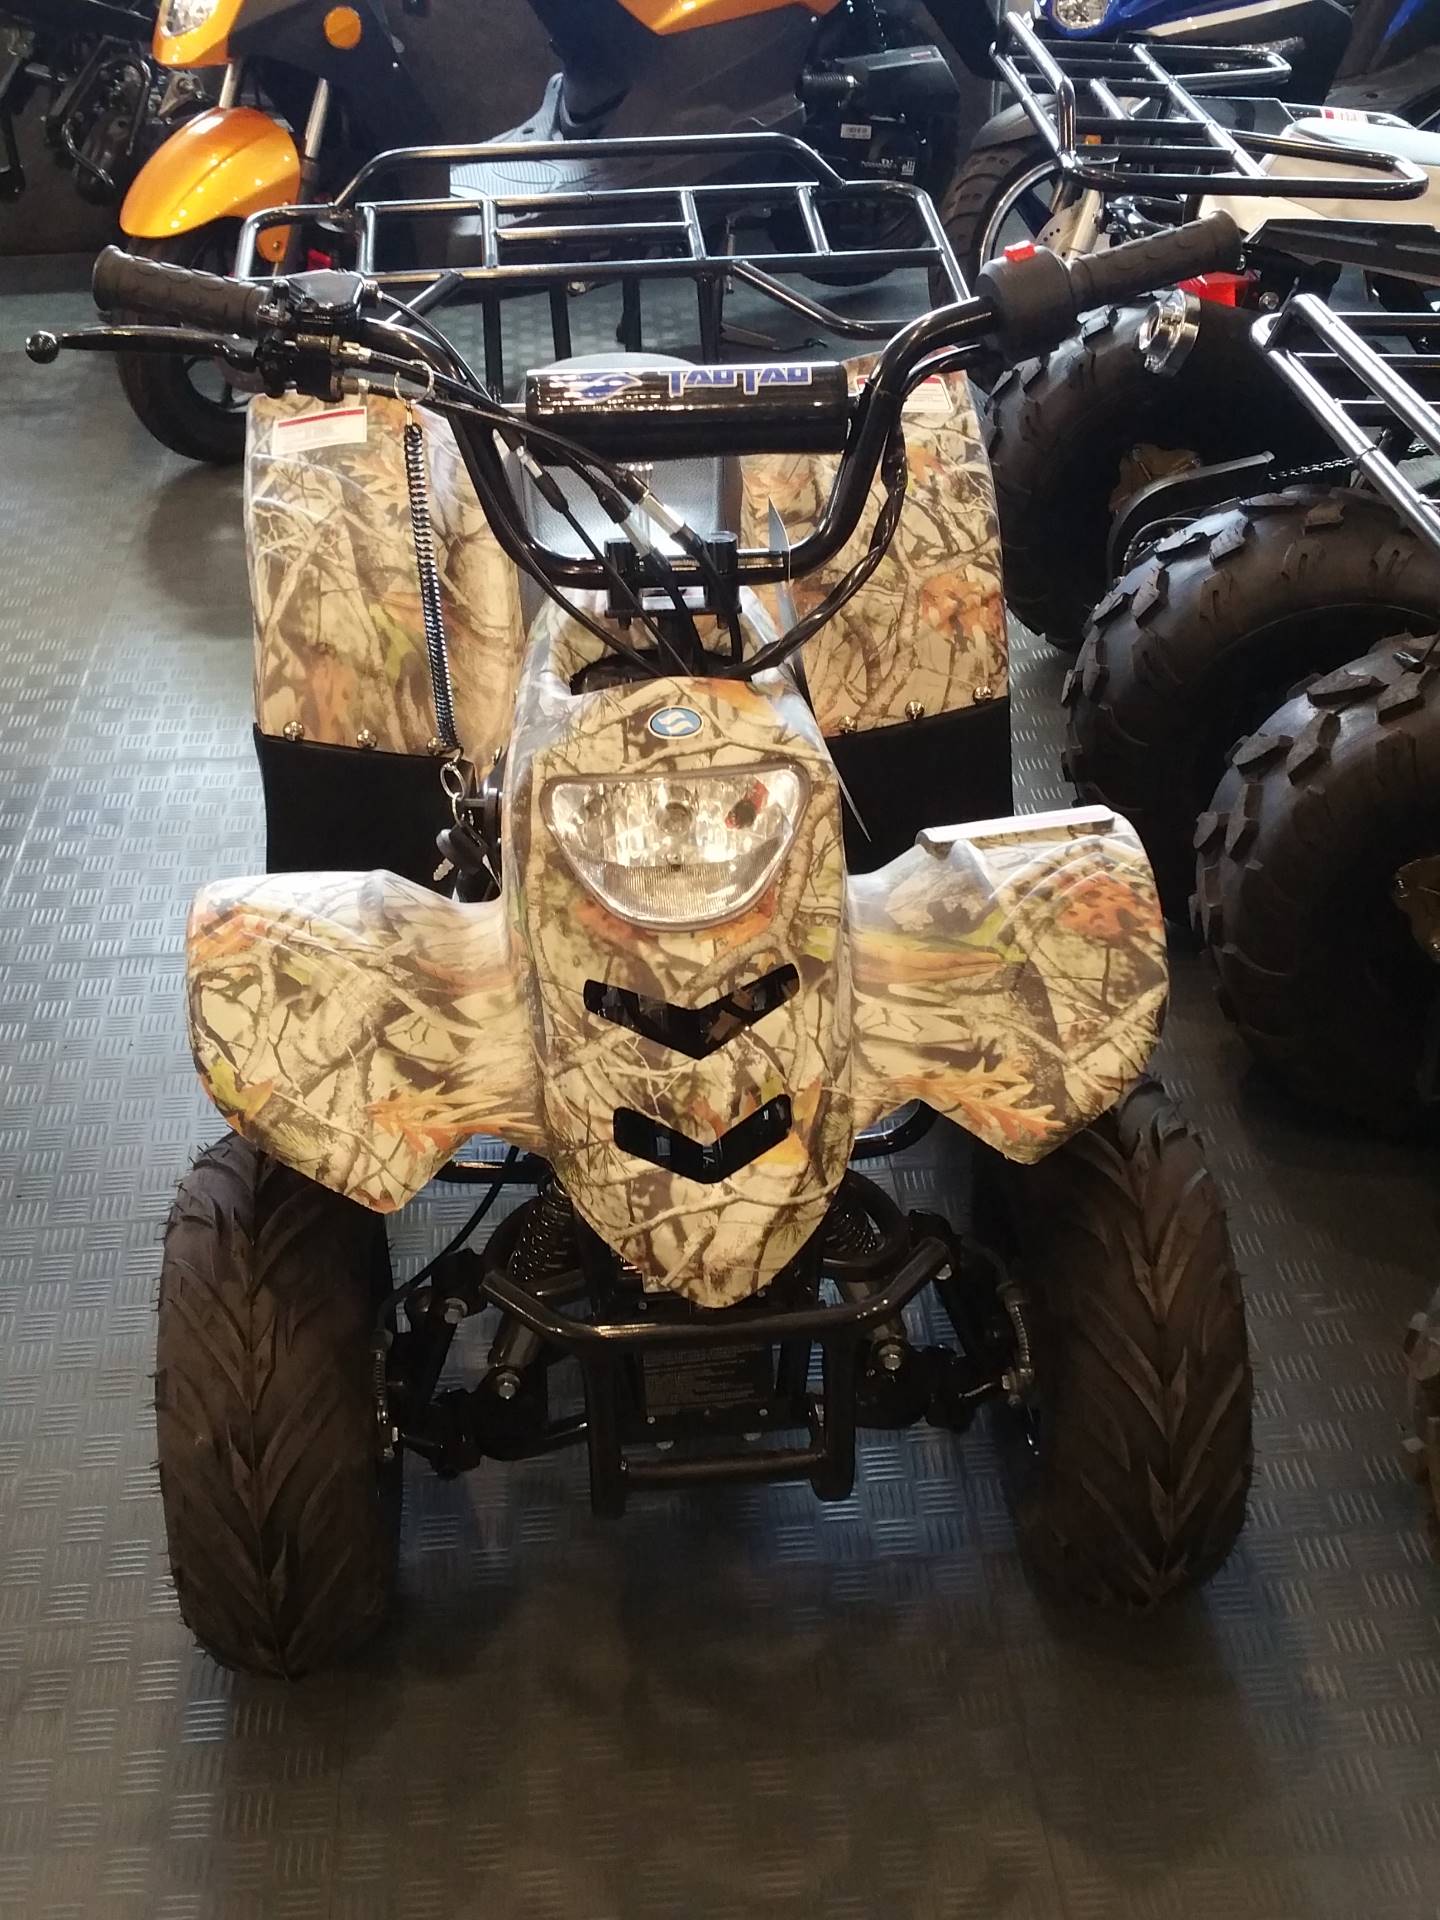 2021 Youth Scout 110cc Youth ATV in Forest Lake, Minnesota